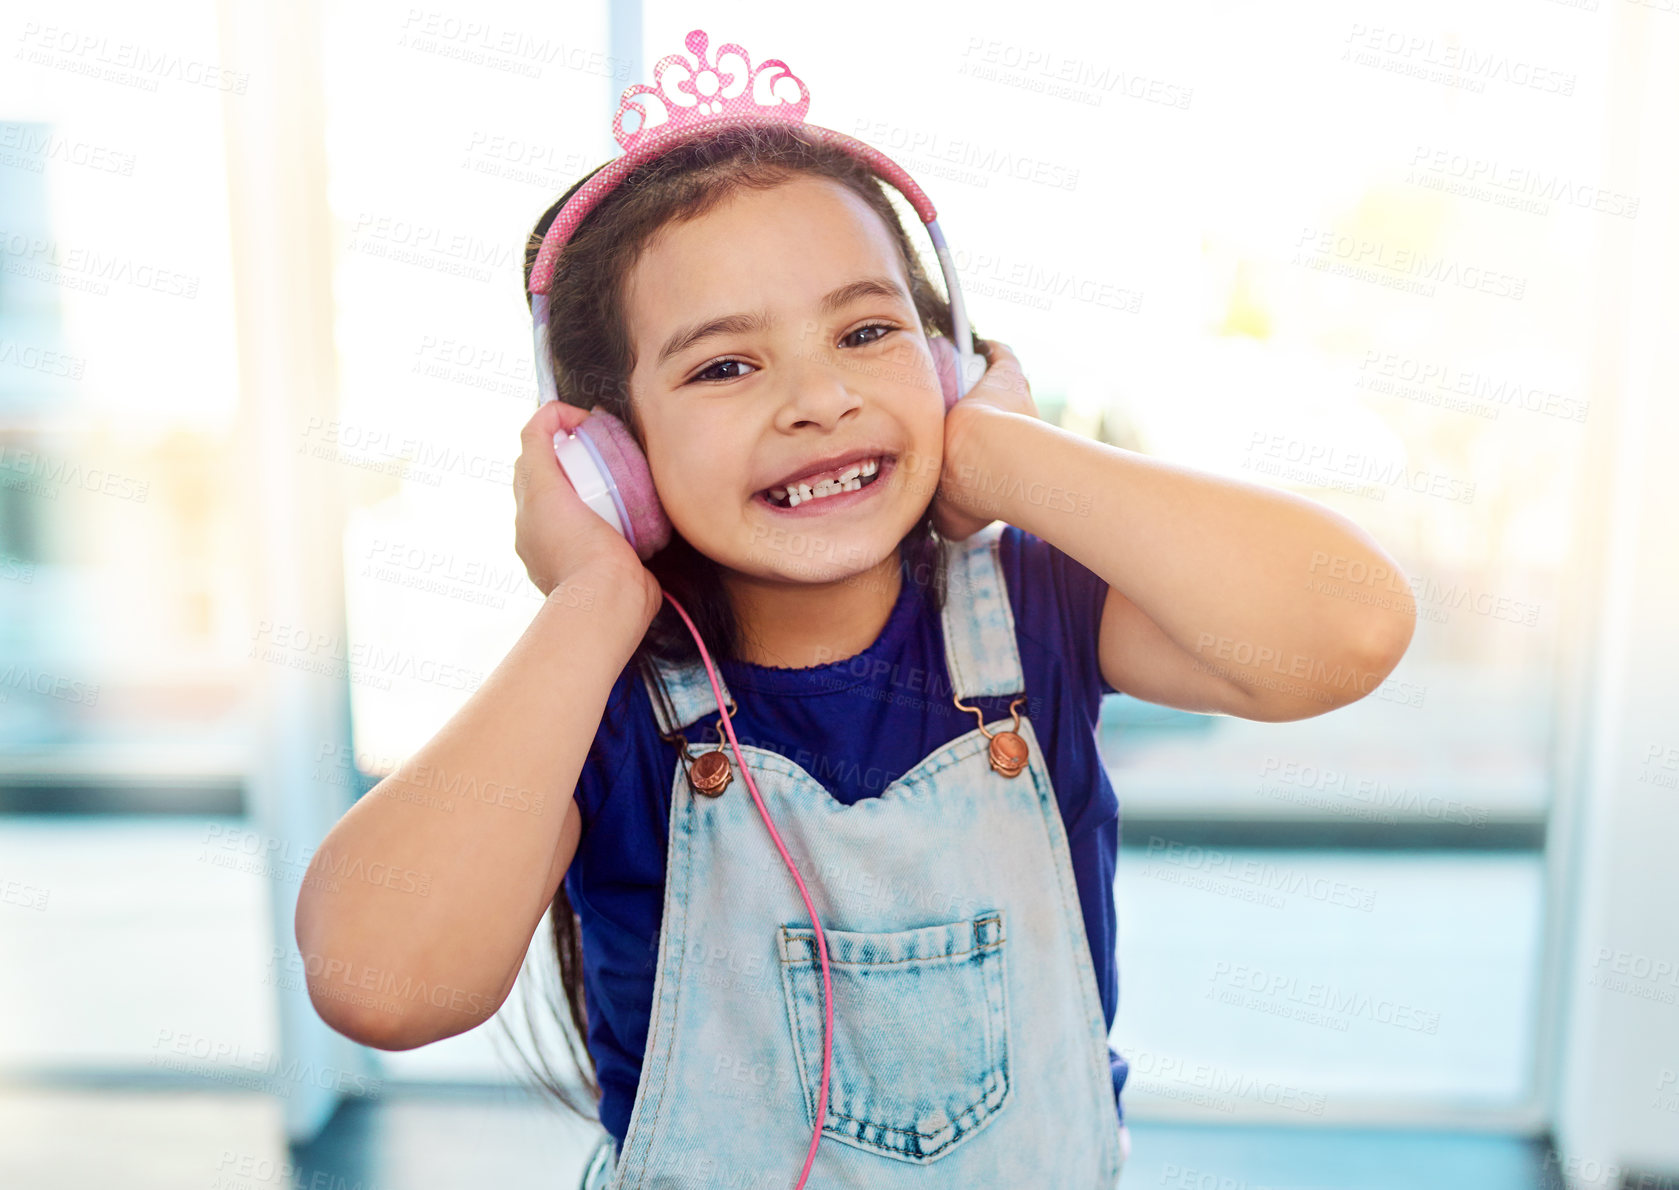 Buy stock photo Shot of an adorable little girl listening to some music on her headphones at home